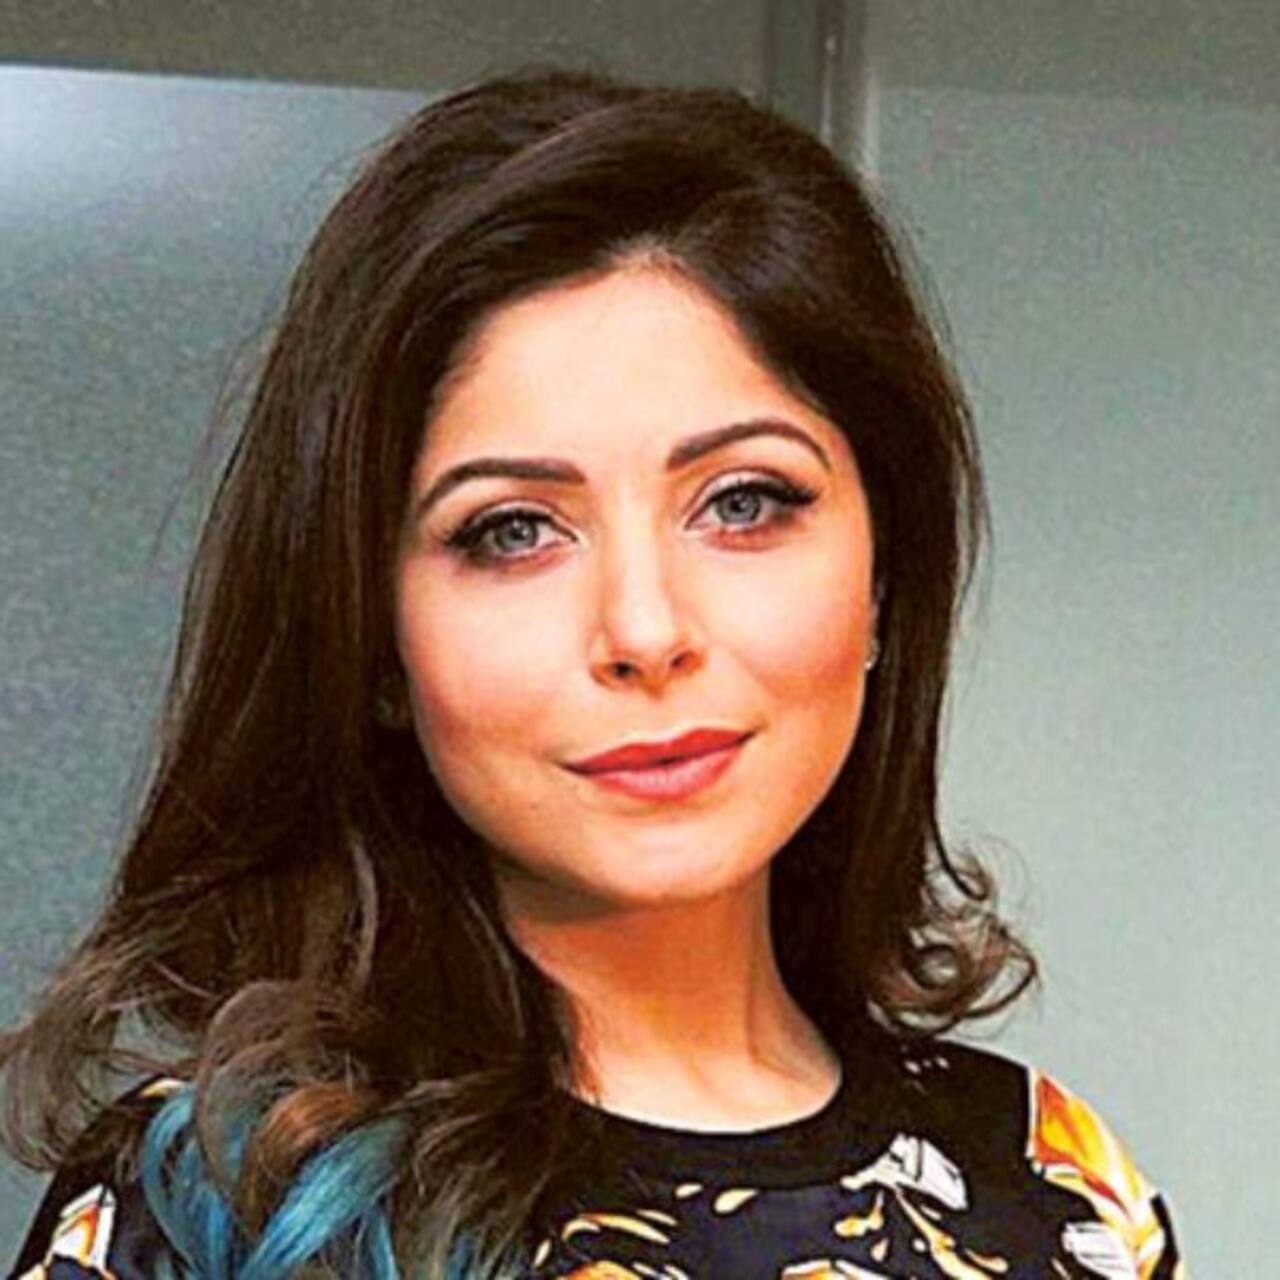 Coronavirus pandemic: Kanika Kapoor to be interrogated by Lucknow police after imposed quarantine